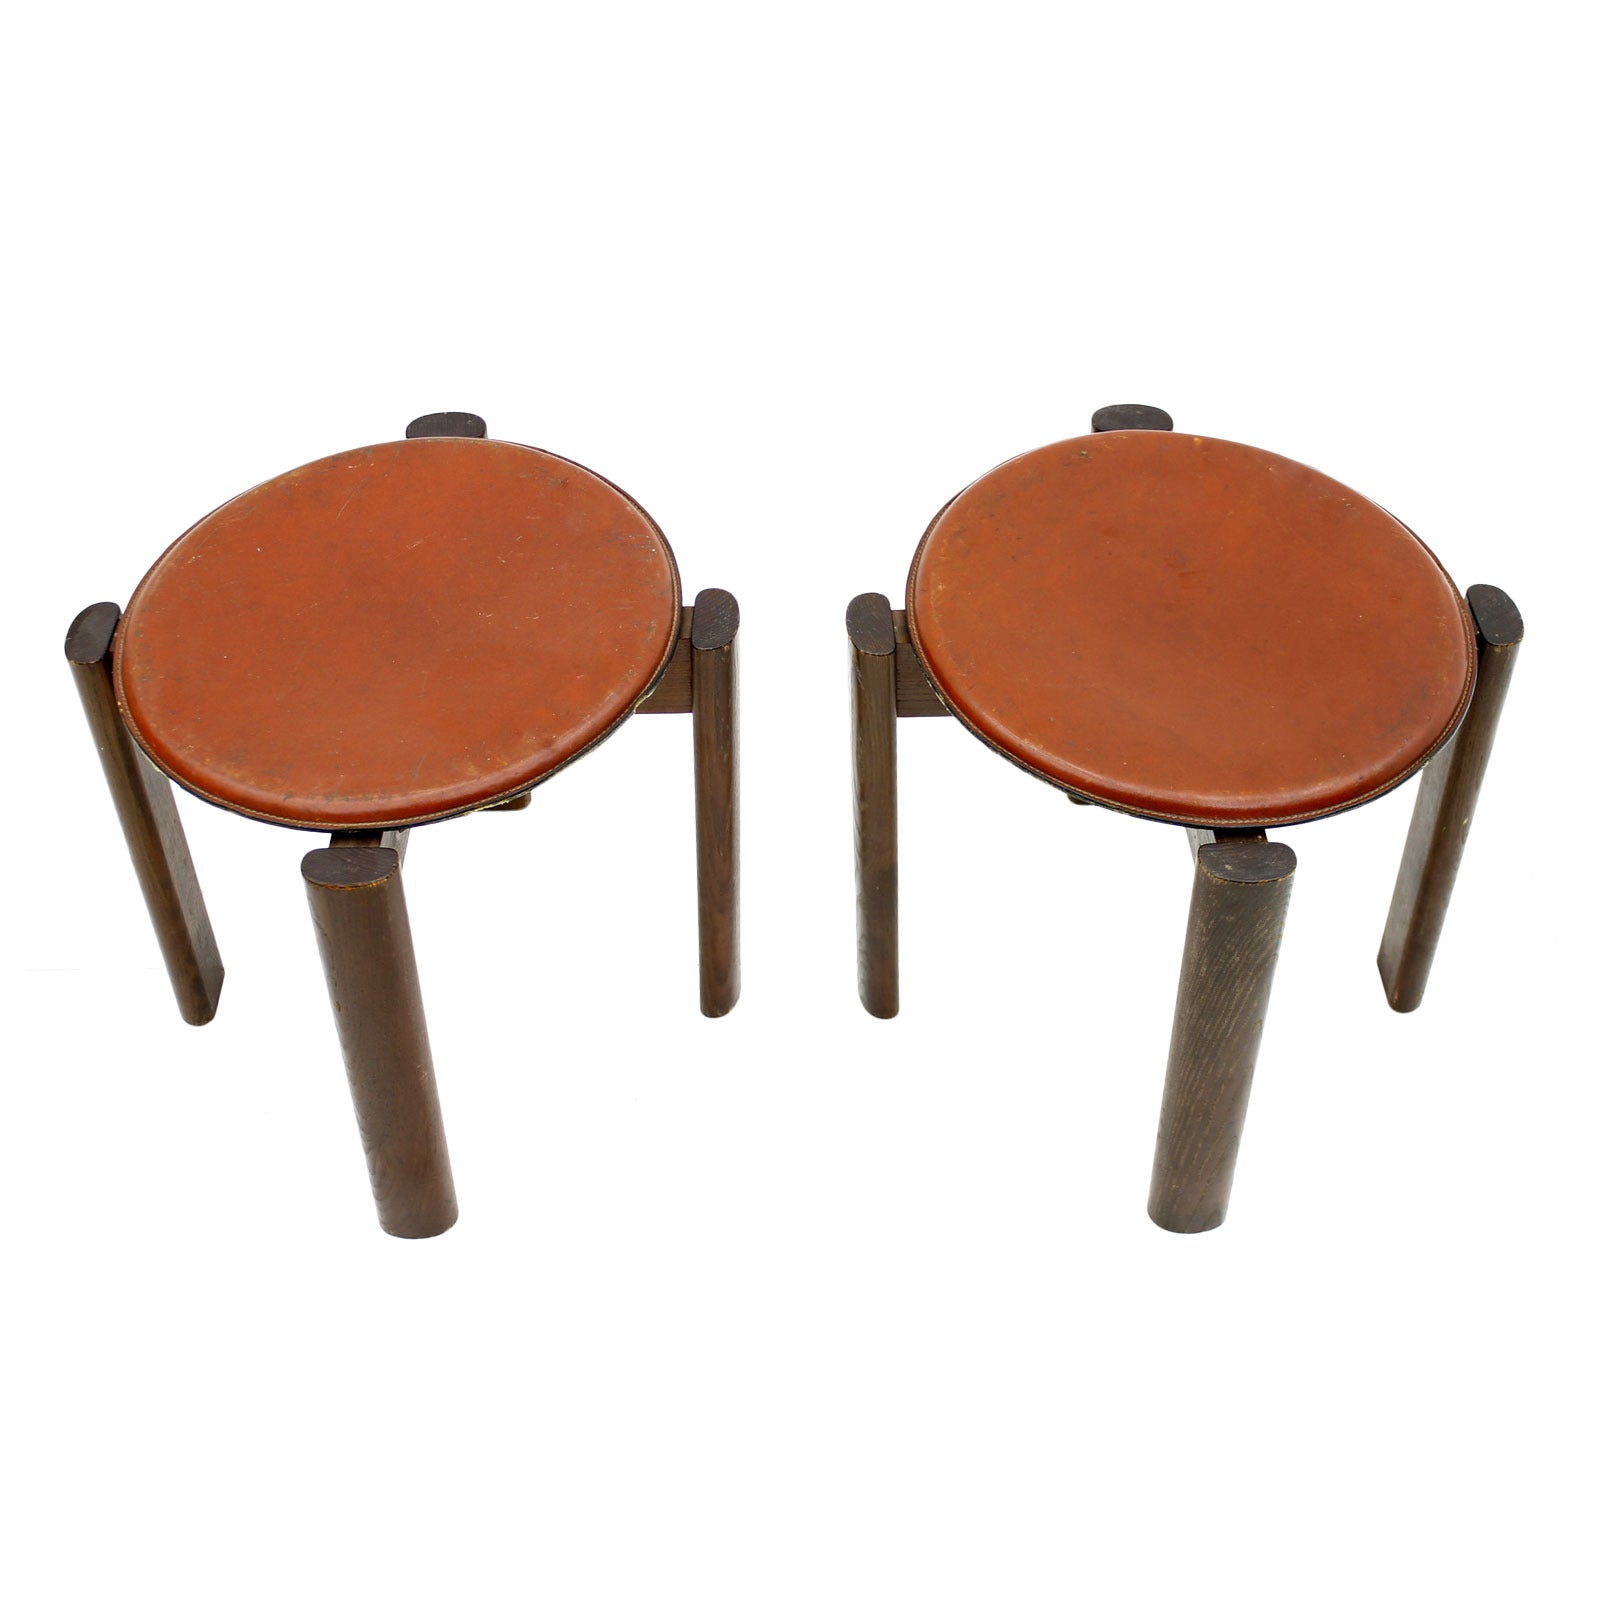 Rare Pair of Cassina Leather and Wood Stools, Italy